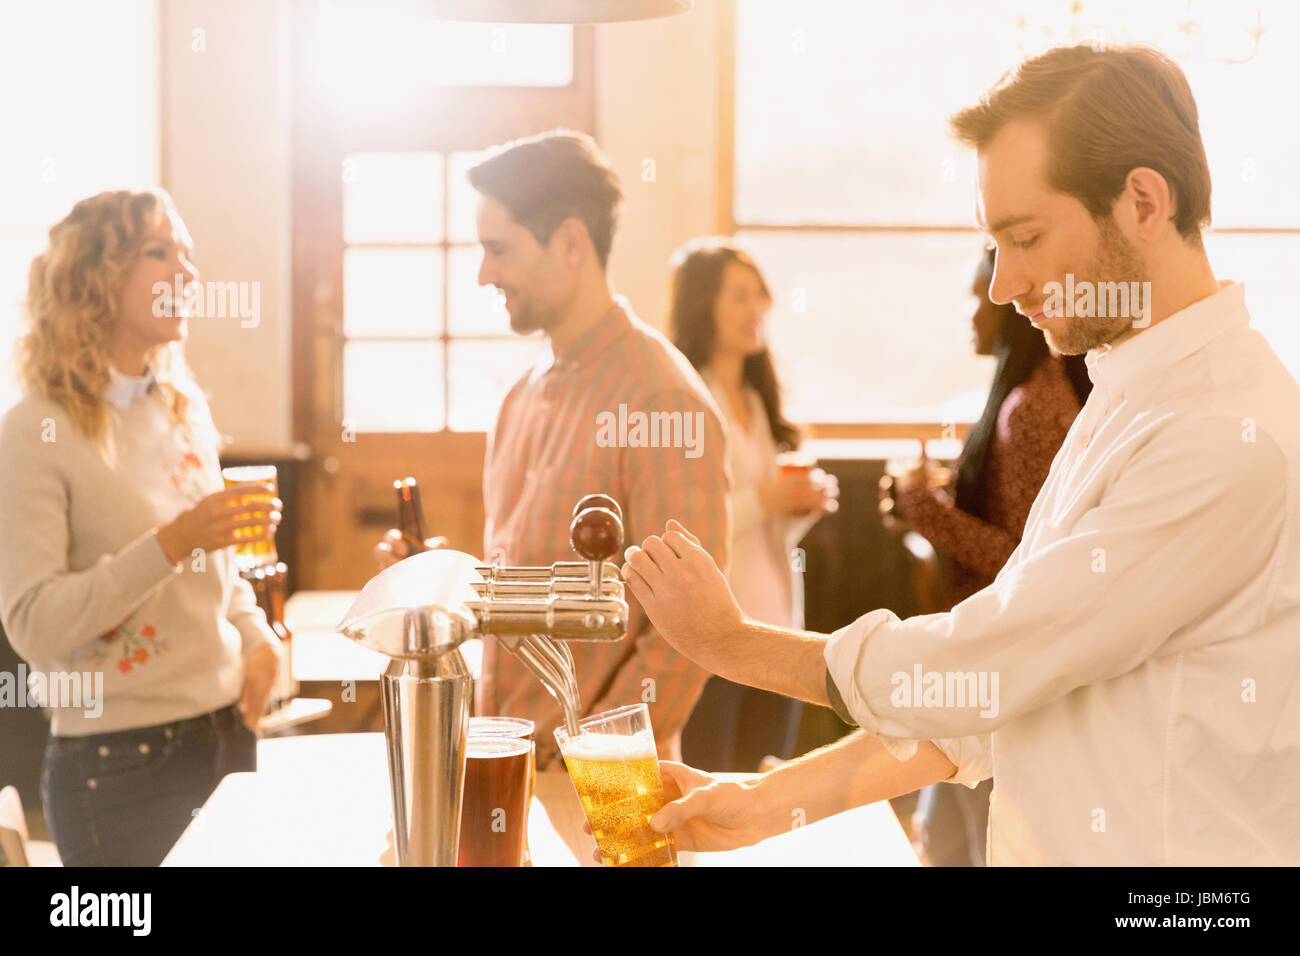 Bartender pouring beer at beer tap behind bar Stock Photo